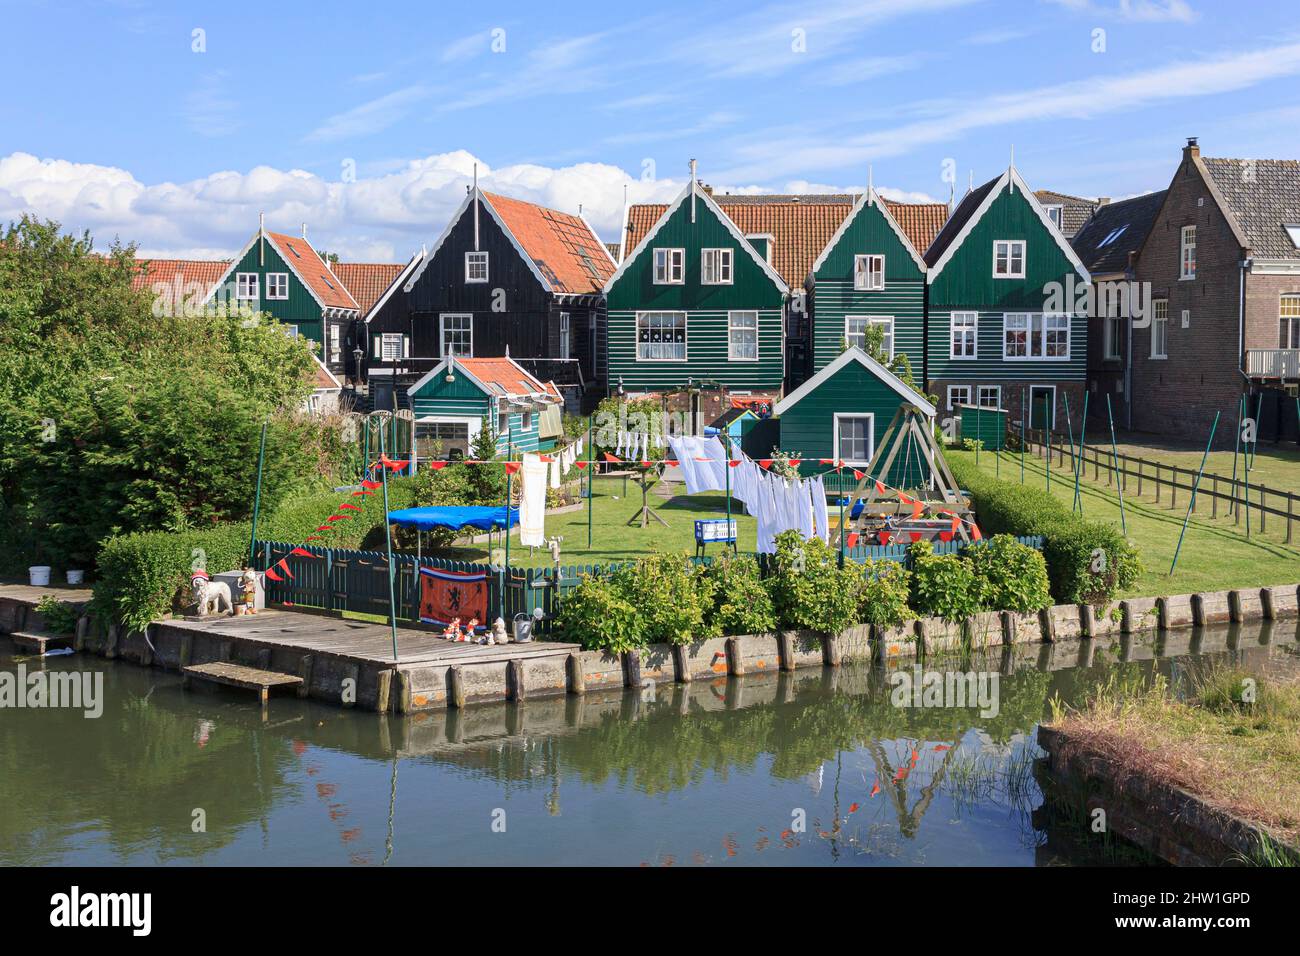 Netherlands, North Holland, Marken, typical wooden houses painted in green and black Stock Photo